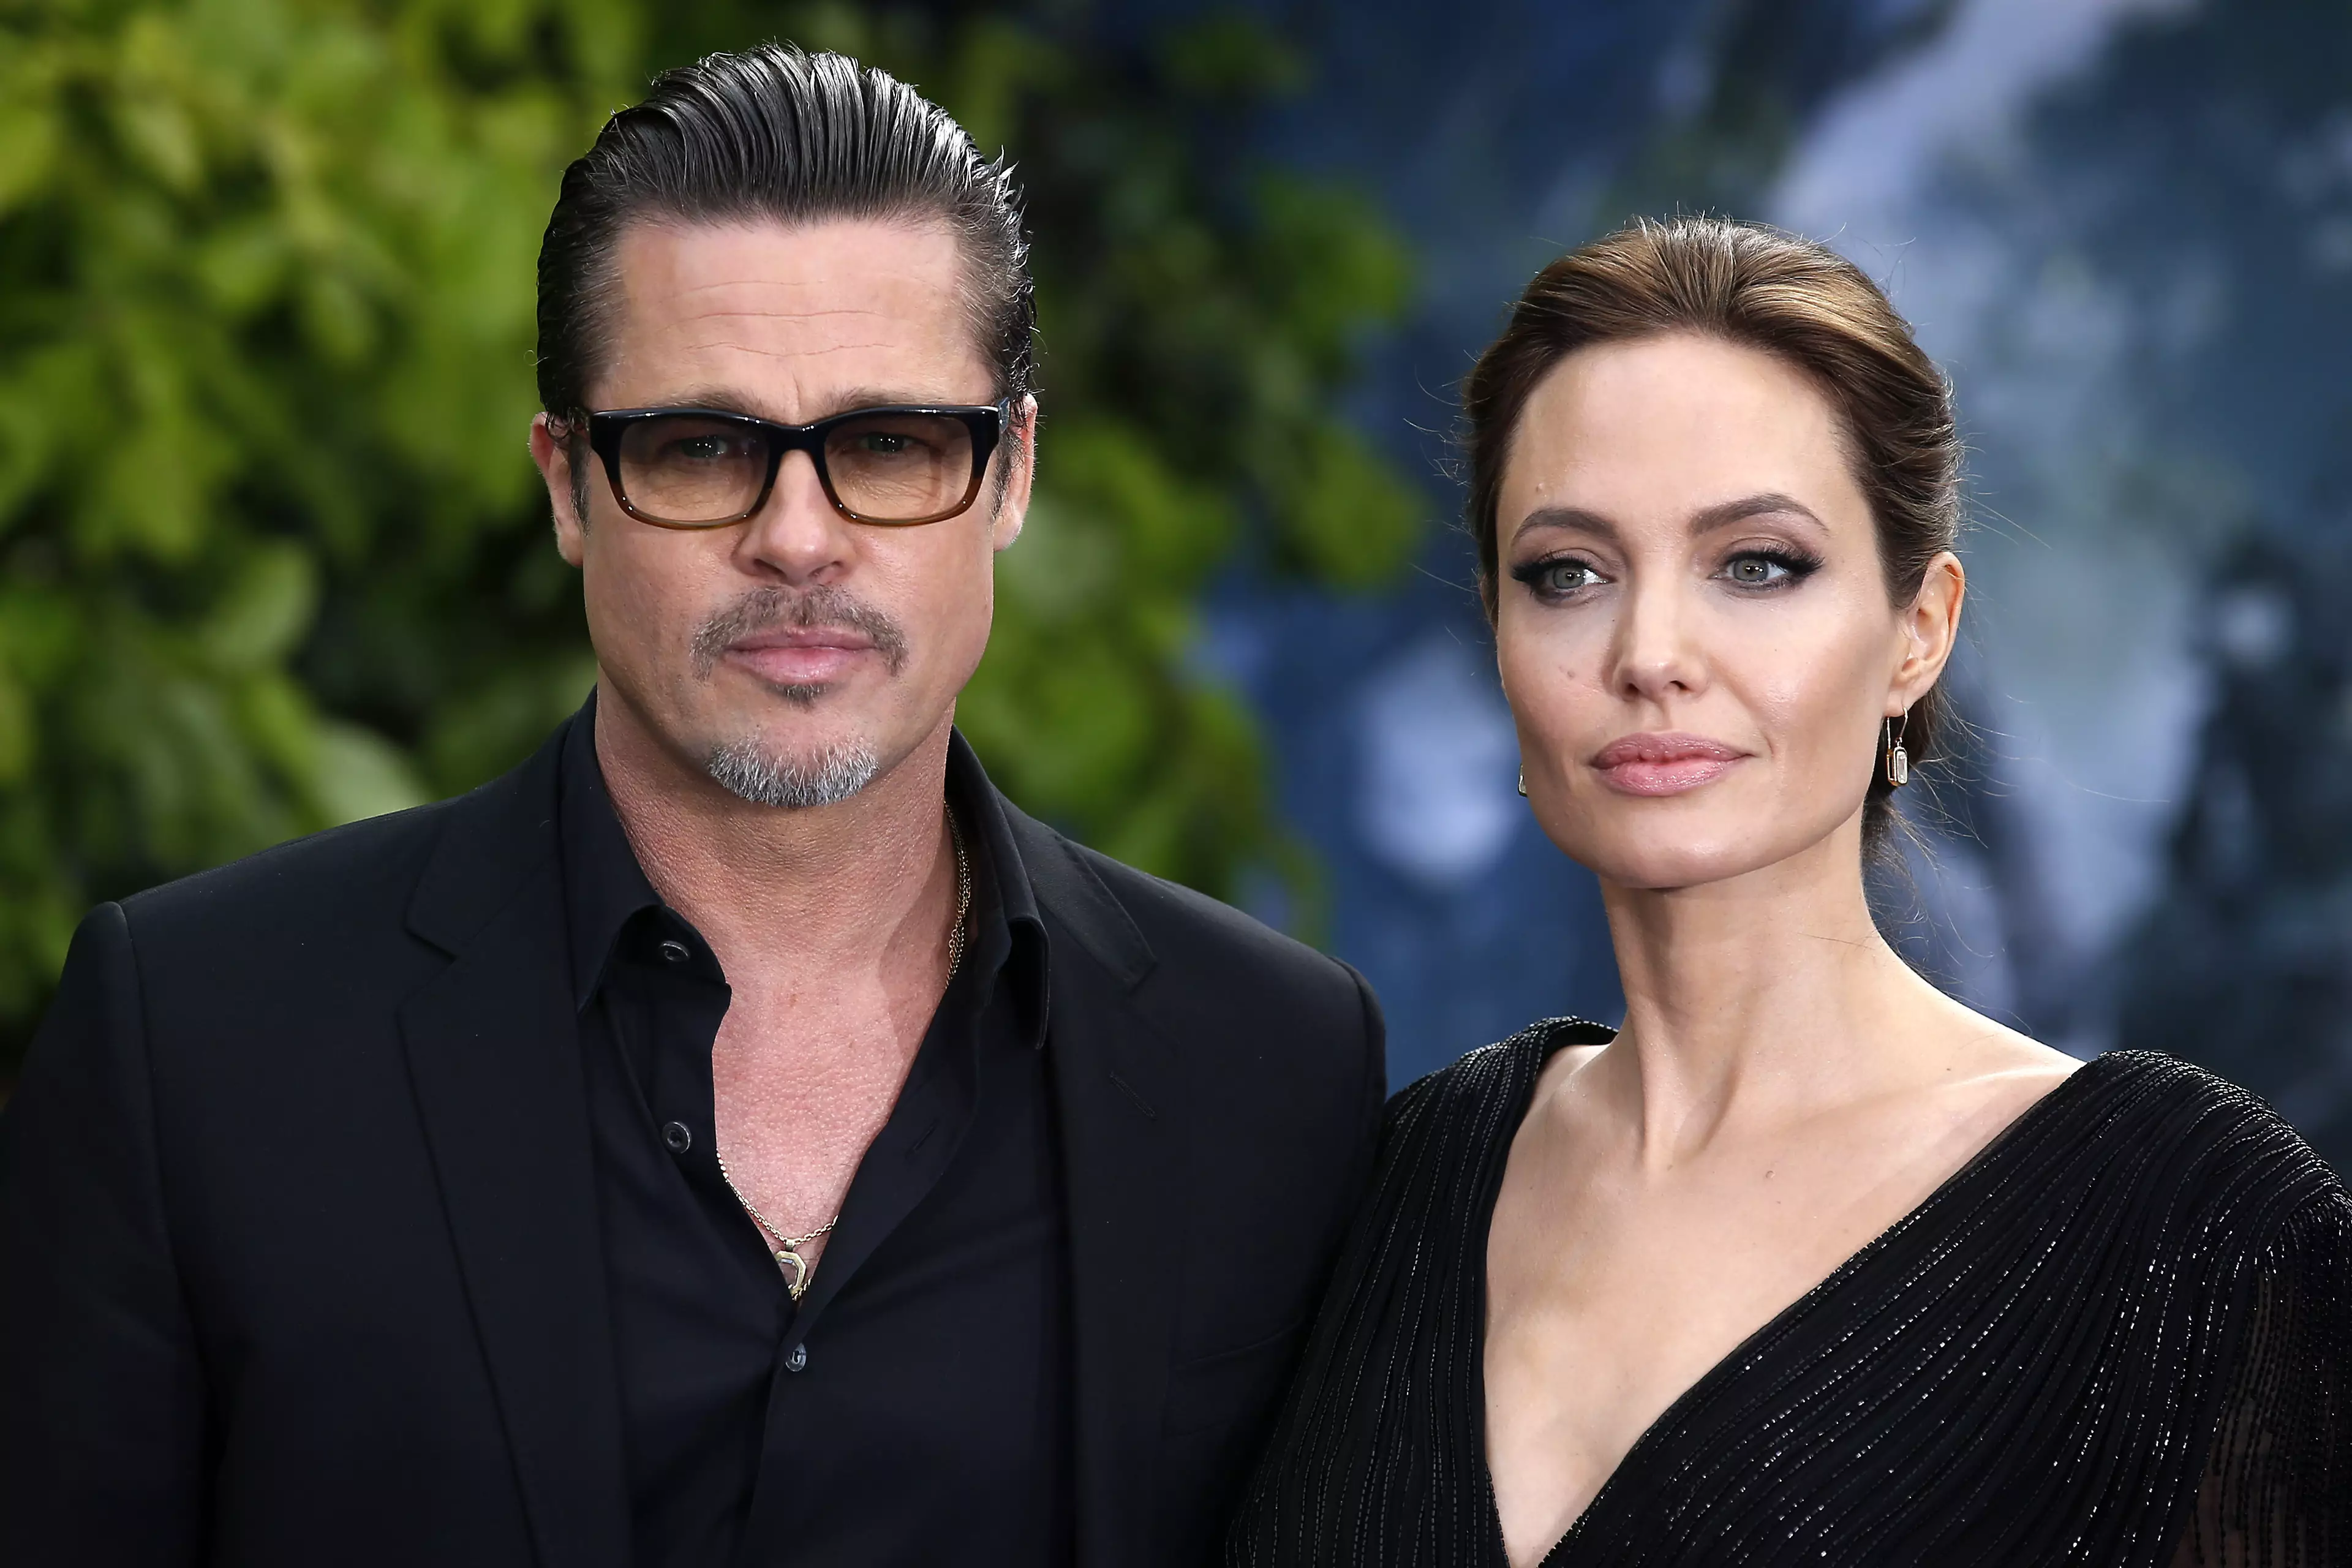 Angelina Jolie and Brad Pitt and the premiere of Maleficent in 2014. (